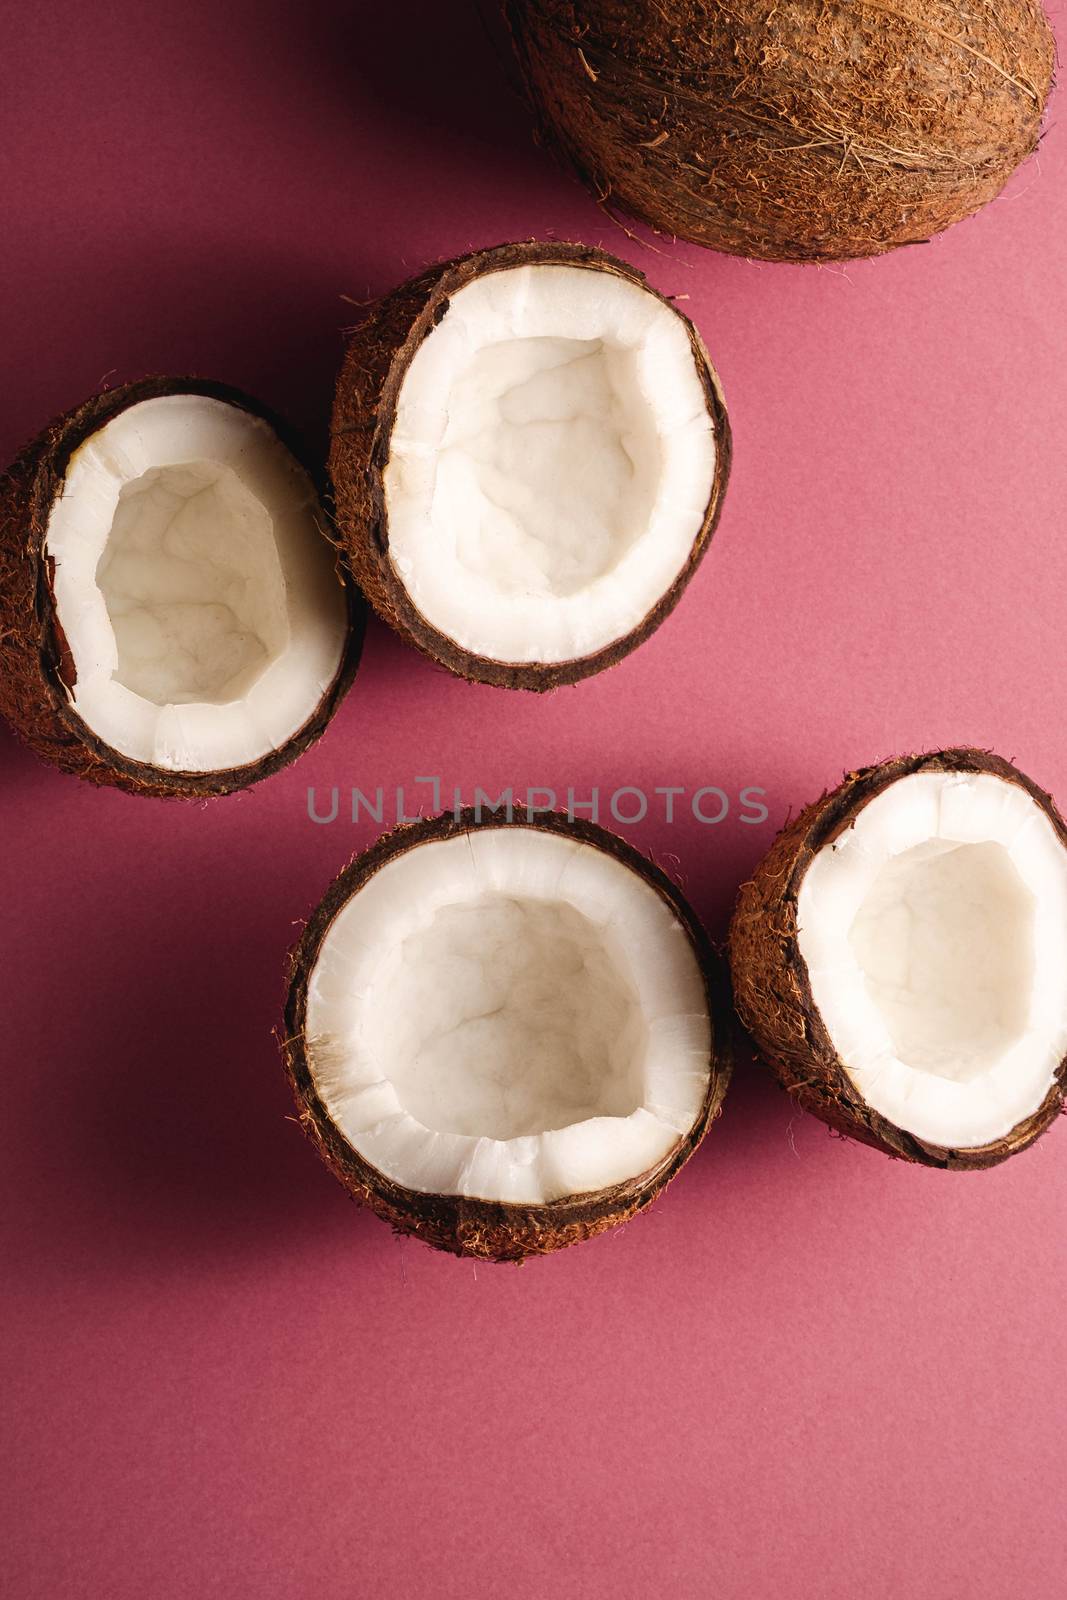 Coconut fruits on pink purple vibrant plain background, abstract food tropical concept, top view